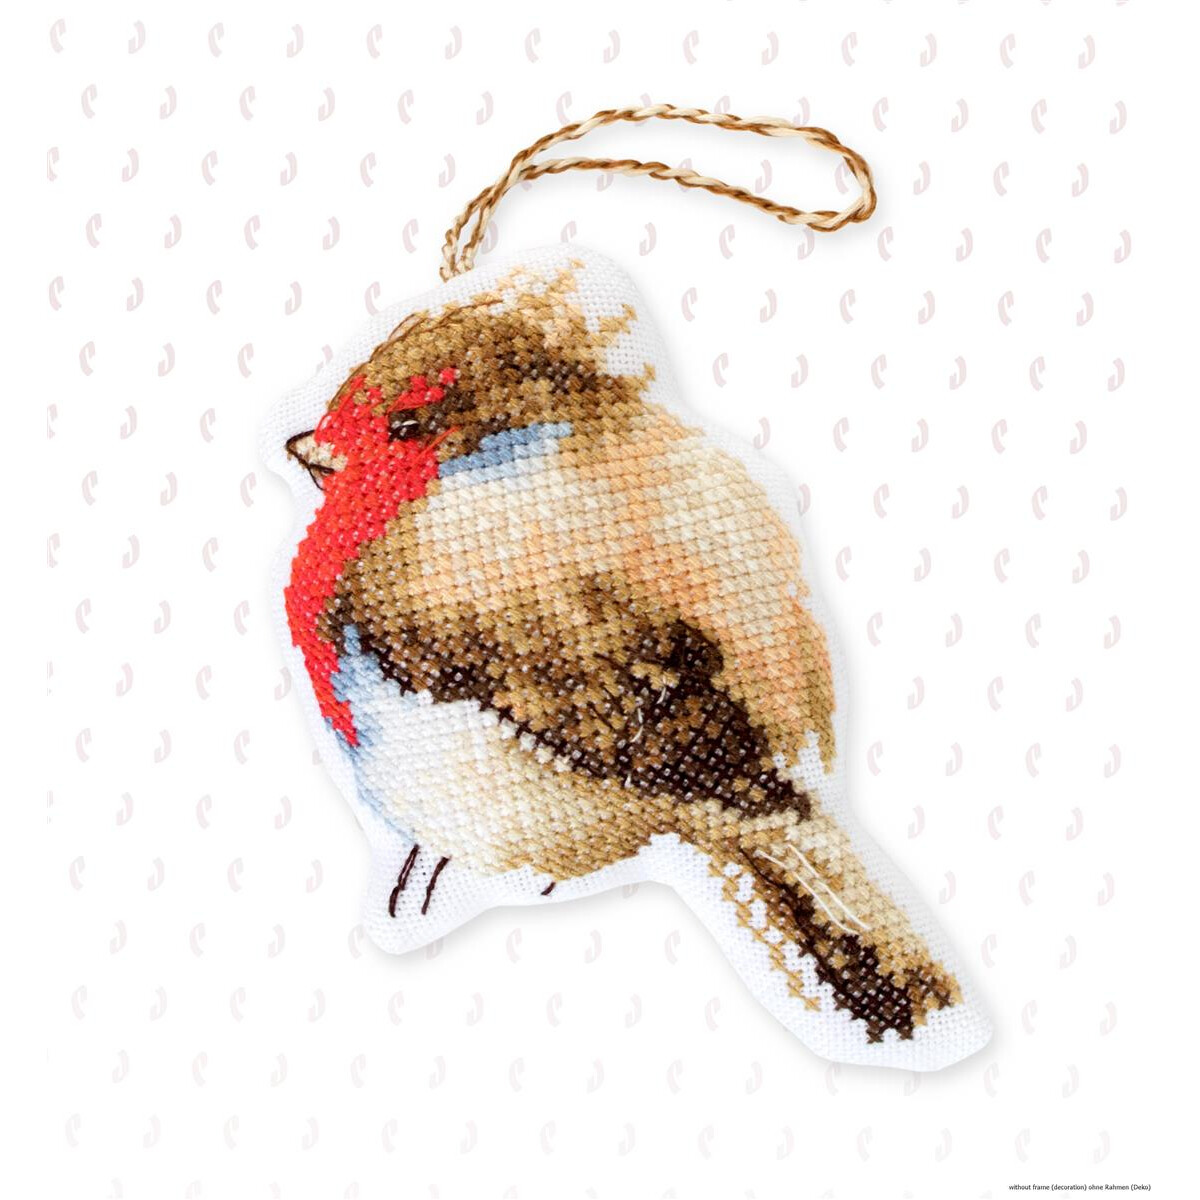 Luca-S counted Cross Stitch kit Toy "Bird",...